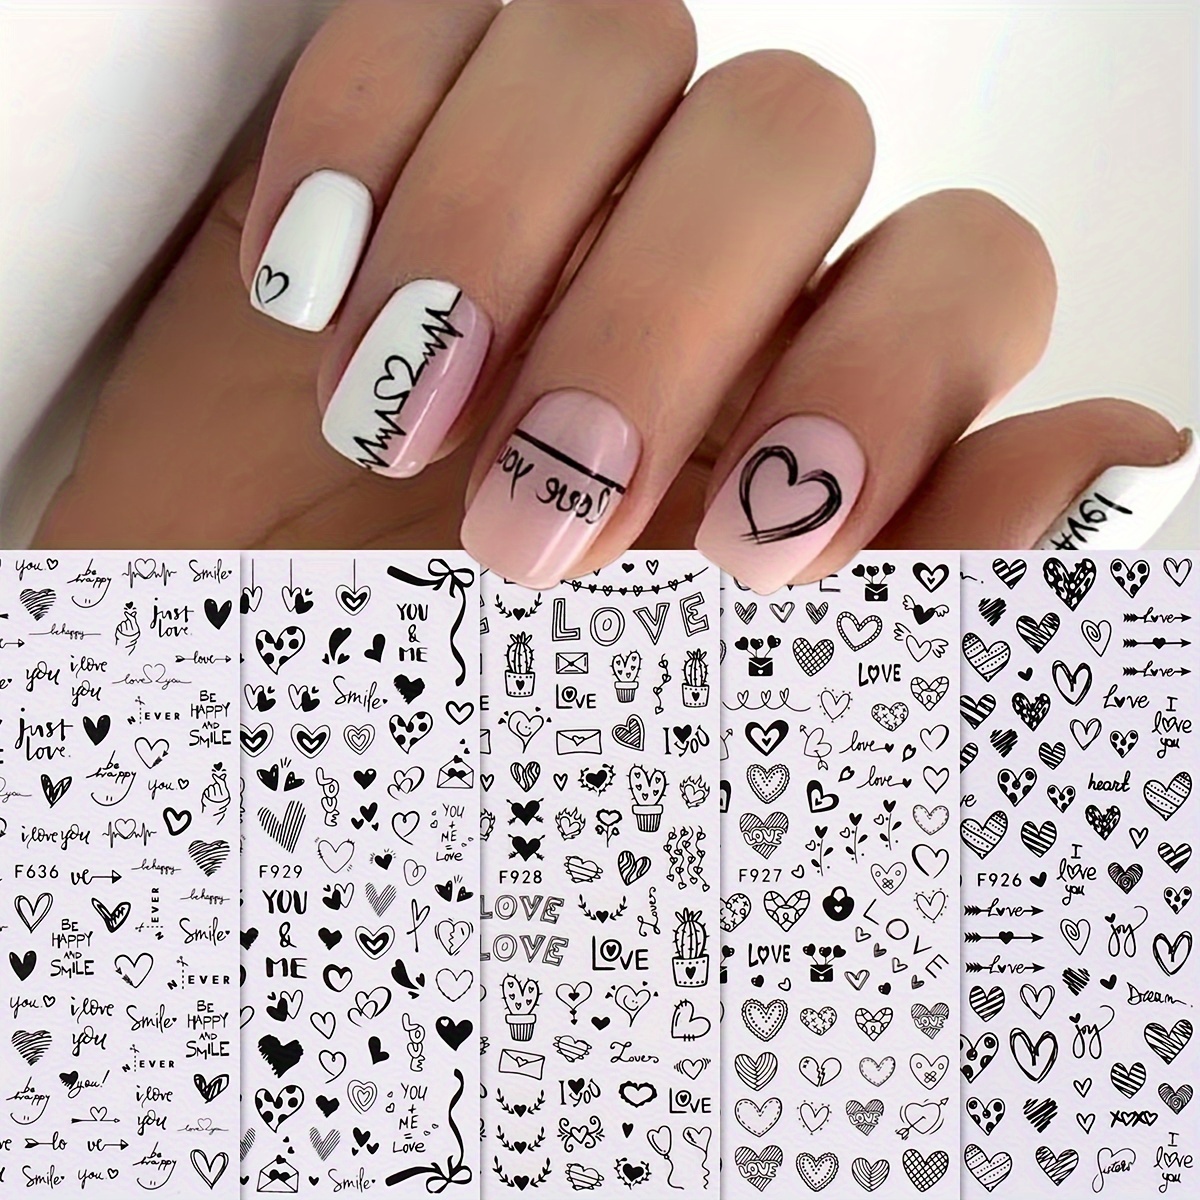 

5 Sheets Valentines Nail Stickers, Black Heart Nail Art Sticker Decal, Solid Hollow Heart 3d Self-adhesive Nail Design For Acrylic Nail, Nail Art Supplies For Women And Girls